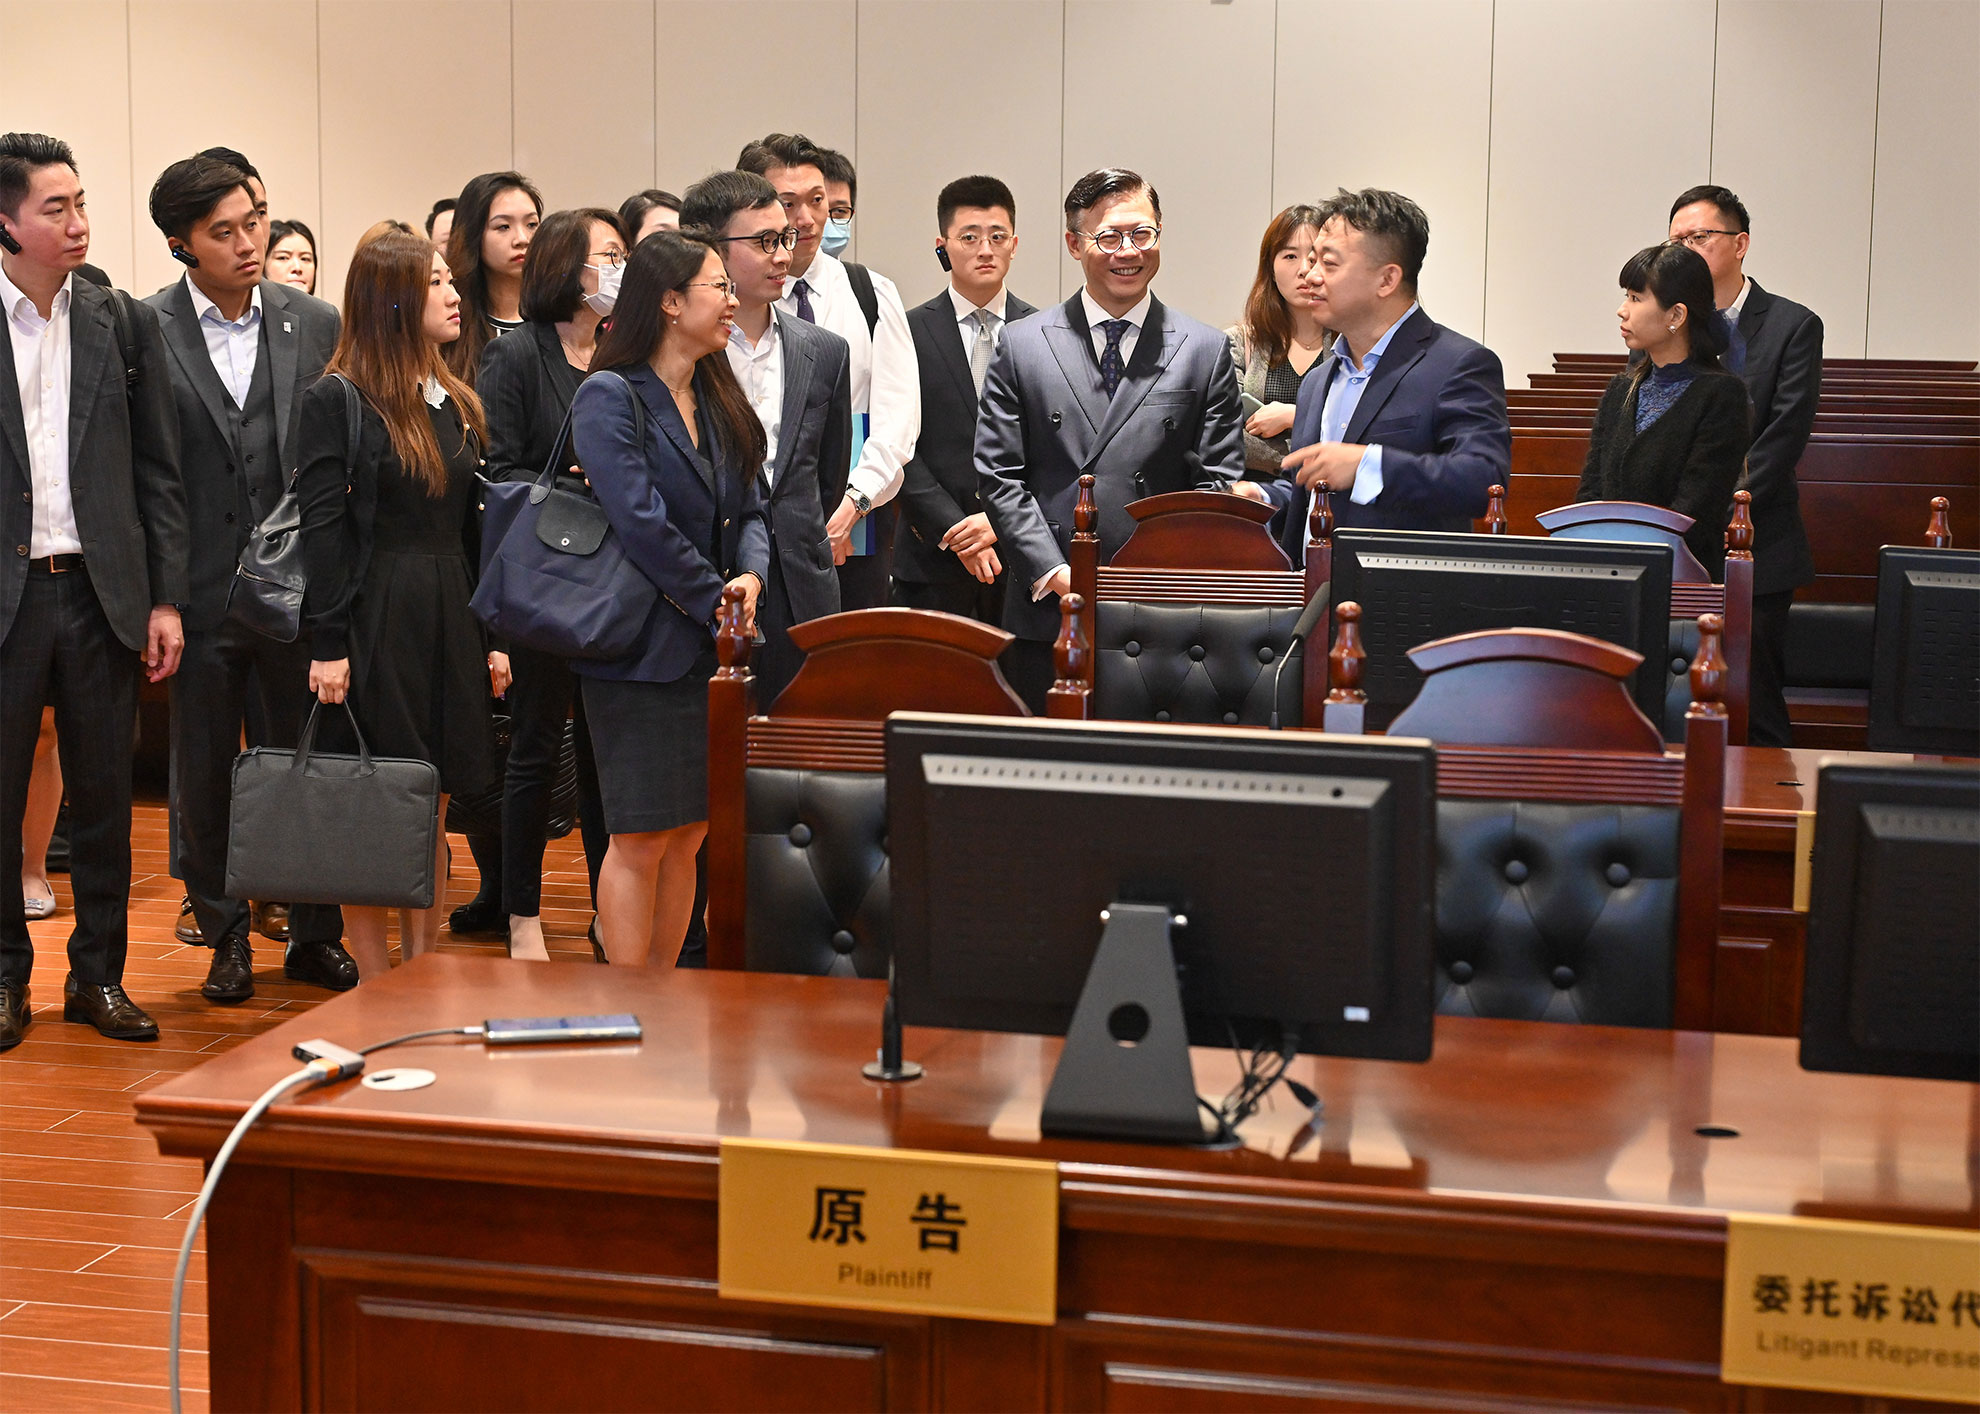 The Deputy Secretary for Justice, Mr Cheung Kwok-kwan, and a delegation of young lawyers led by him today (November 17) finished the first stop, Shenzhen, of their visit to Mainland cities of the Greater Bay Area. Photo shows Mr Cheung (third right) and other members of the delegation being briefed by the President of the Shenzhen Qianhai Cooperation Zone People's Court, Mr Bian Fei (second right), during their visit to the technology court.